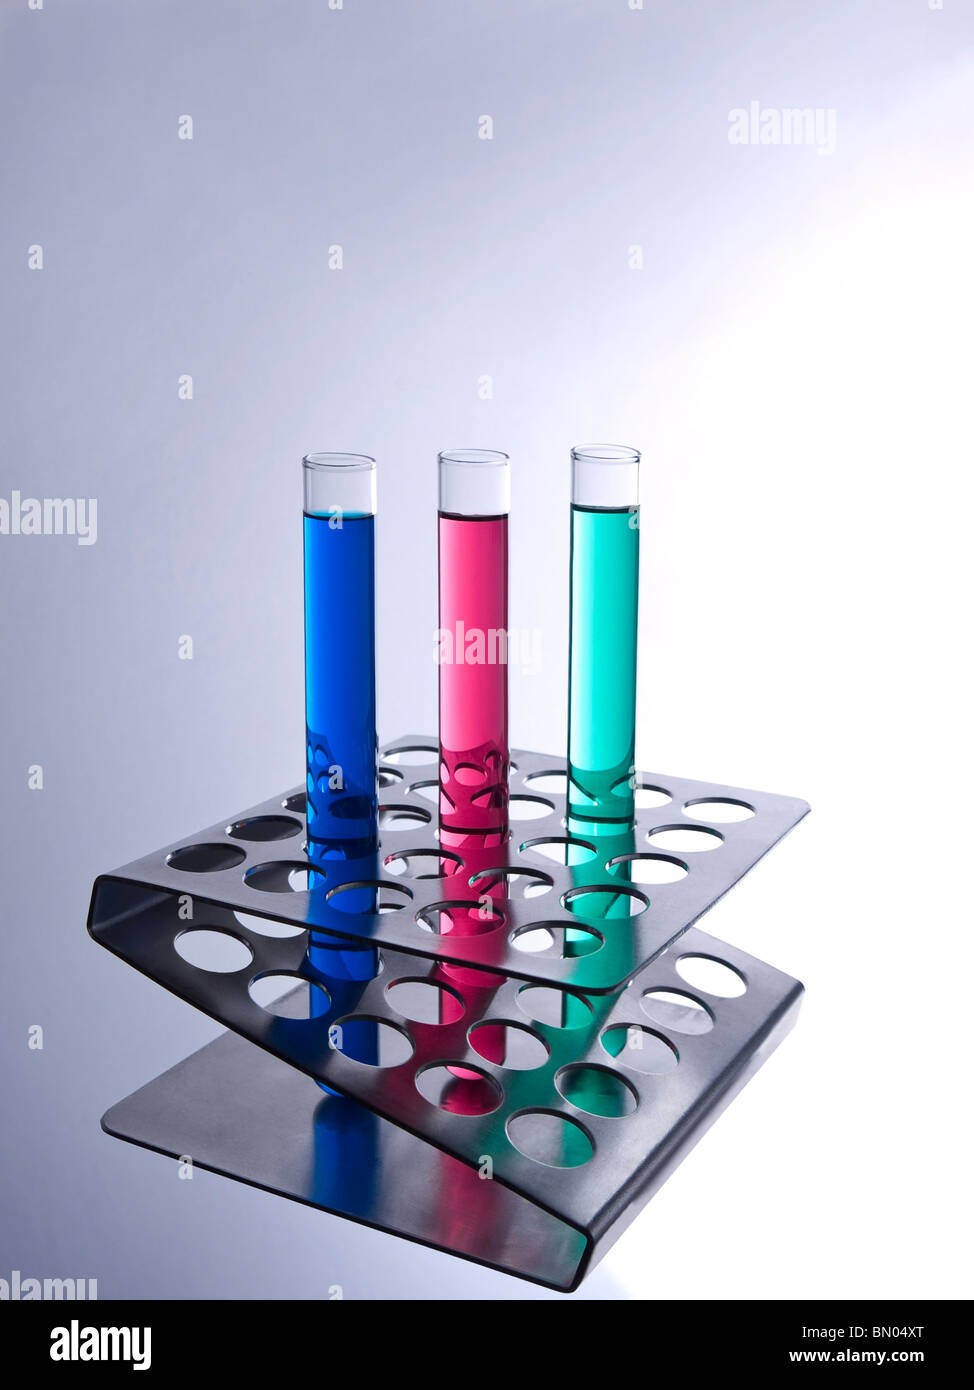 Three test tubes filled with colored liquids on a metallic rack. Stock Photo